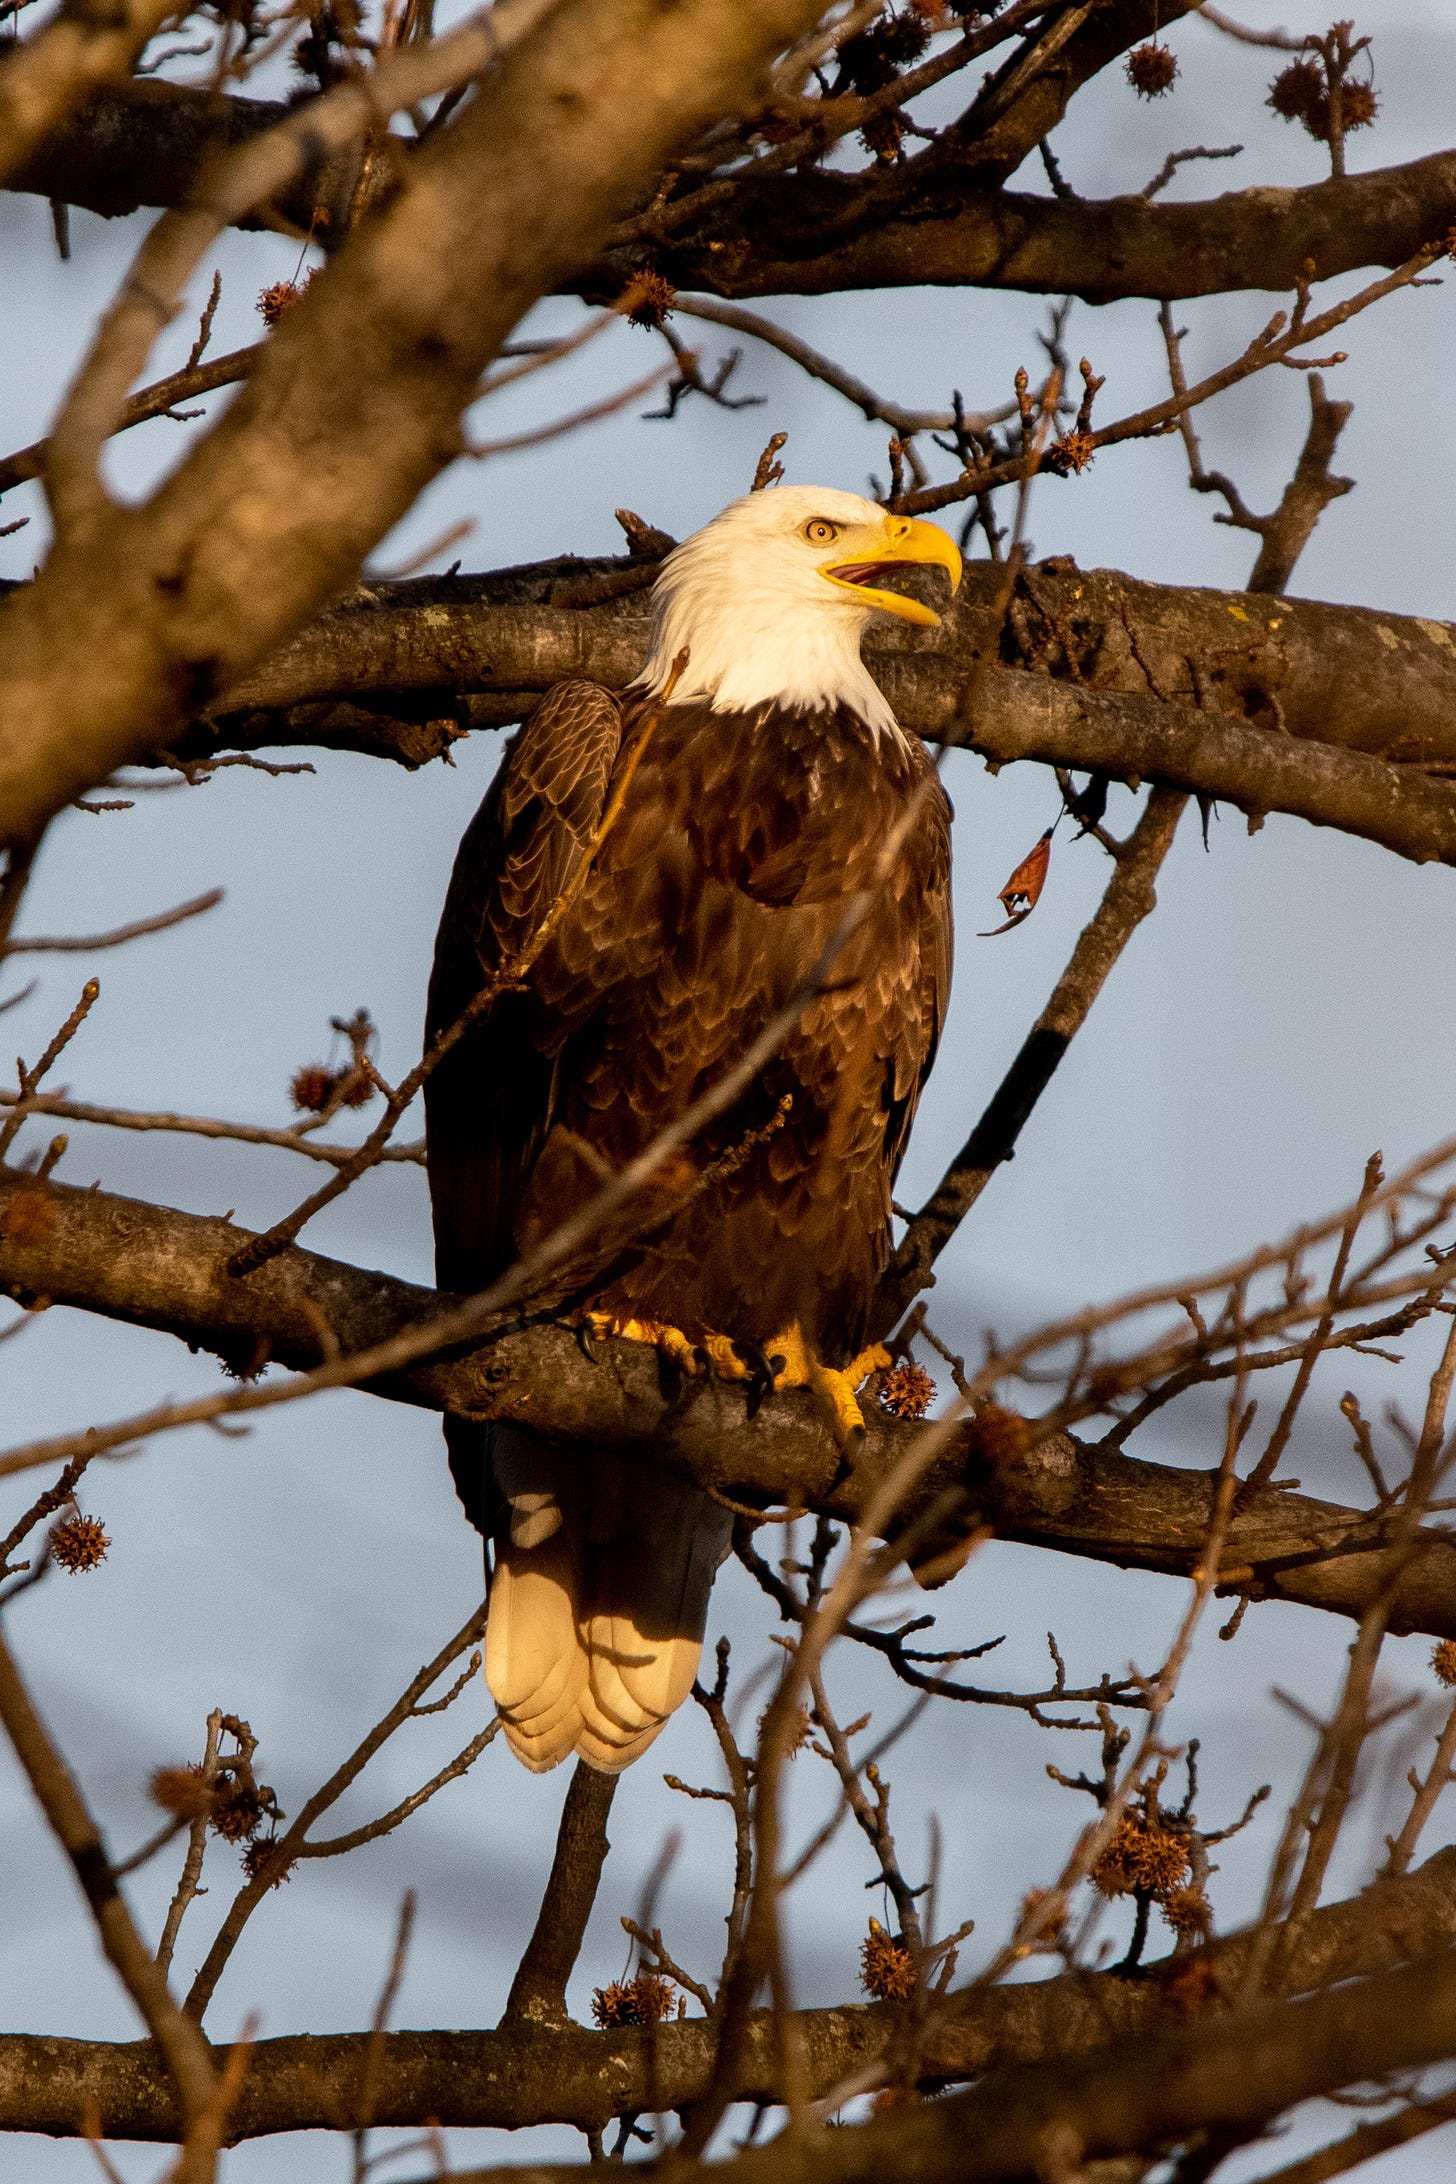 A bald eagle vocalizing, its beak open, as it perches in a sycamore during the golden hour